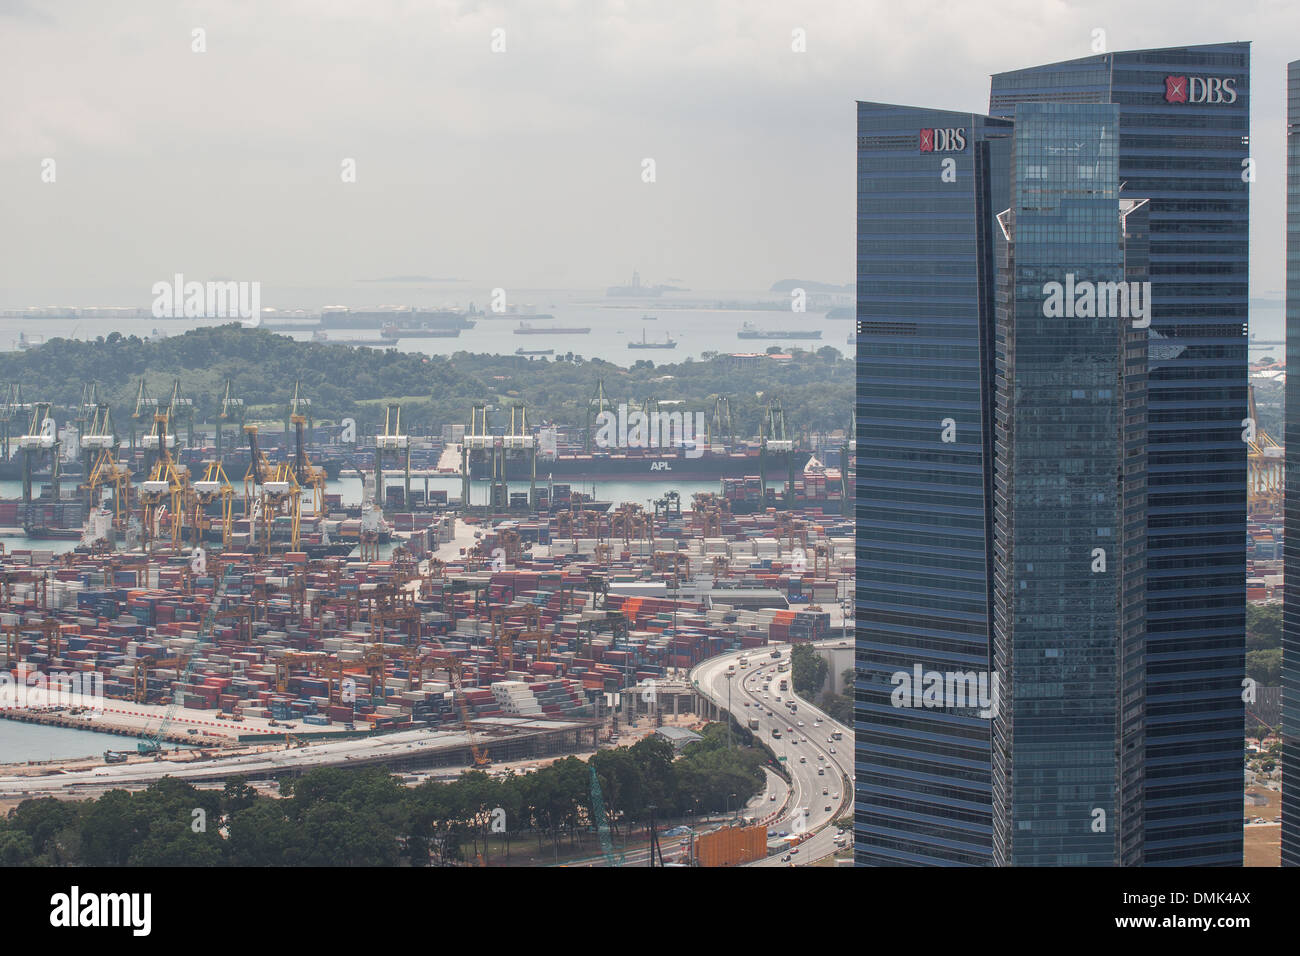 VIEW FROM THE TERRACE OF THE HOTEL MARINA BAY SANDS OF A BUILDING IN THE FINANCIAL DISTRICT AND, IN THE DISTANCE, THE COMMERCIAL PORT OF SINGAPORE, MARINA BAY, CENTRAL BUSINESS DISTRICT, SINGAPORE Stock Photo